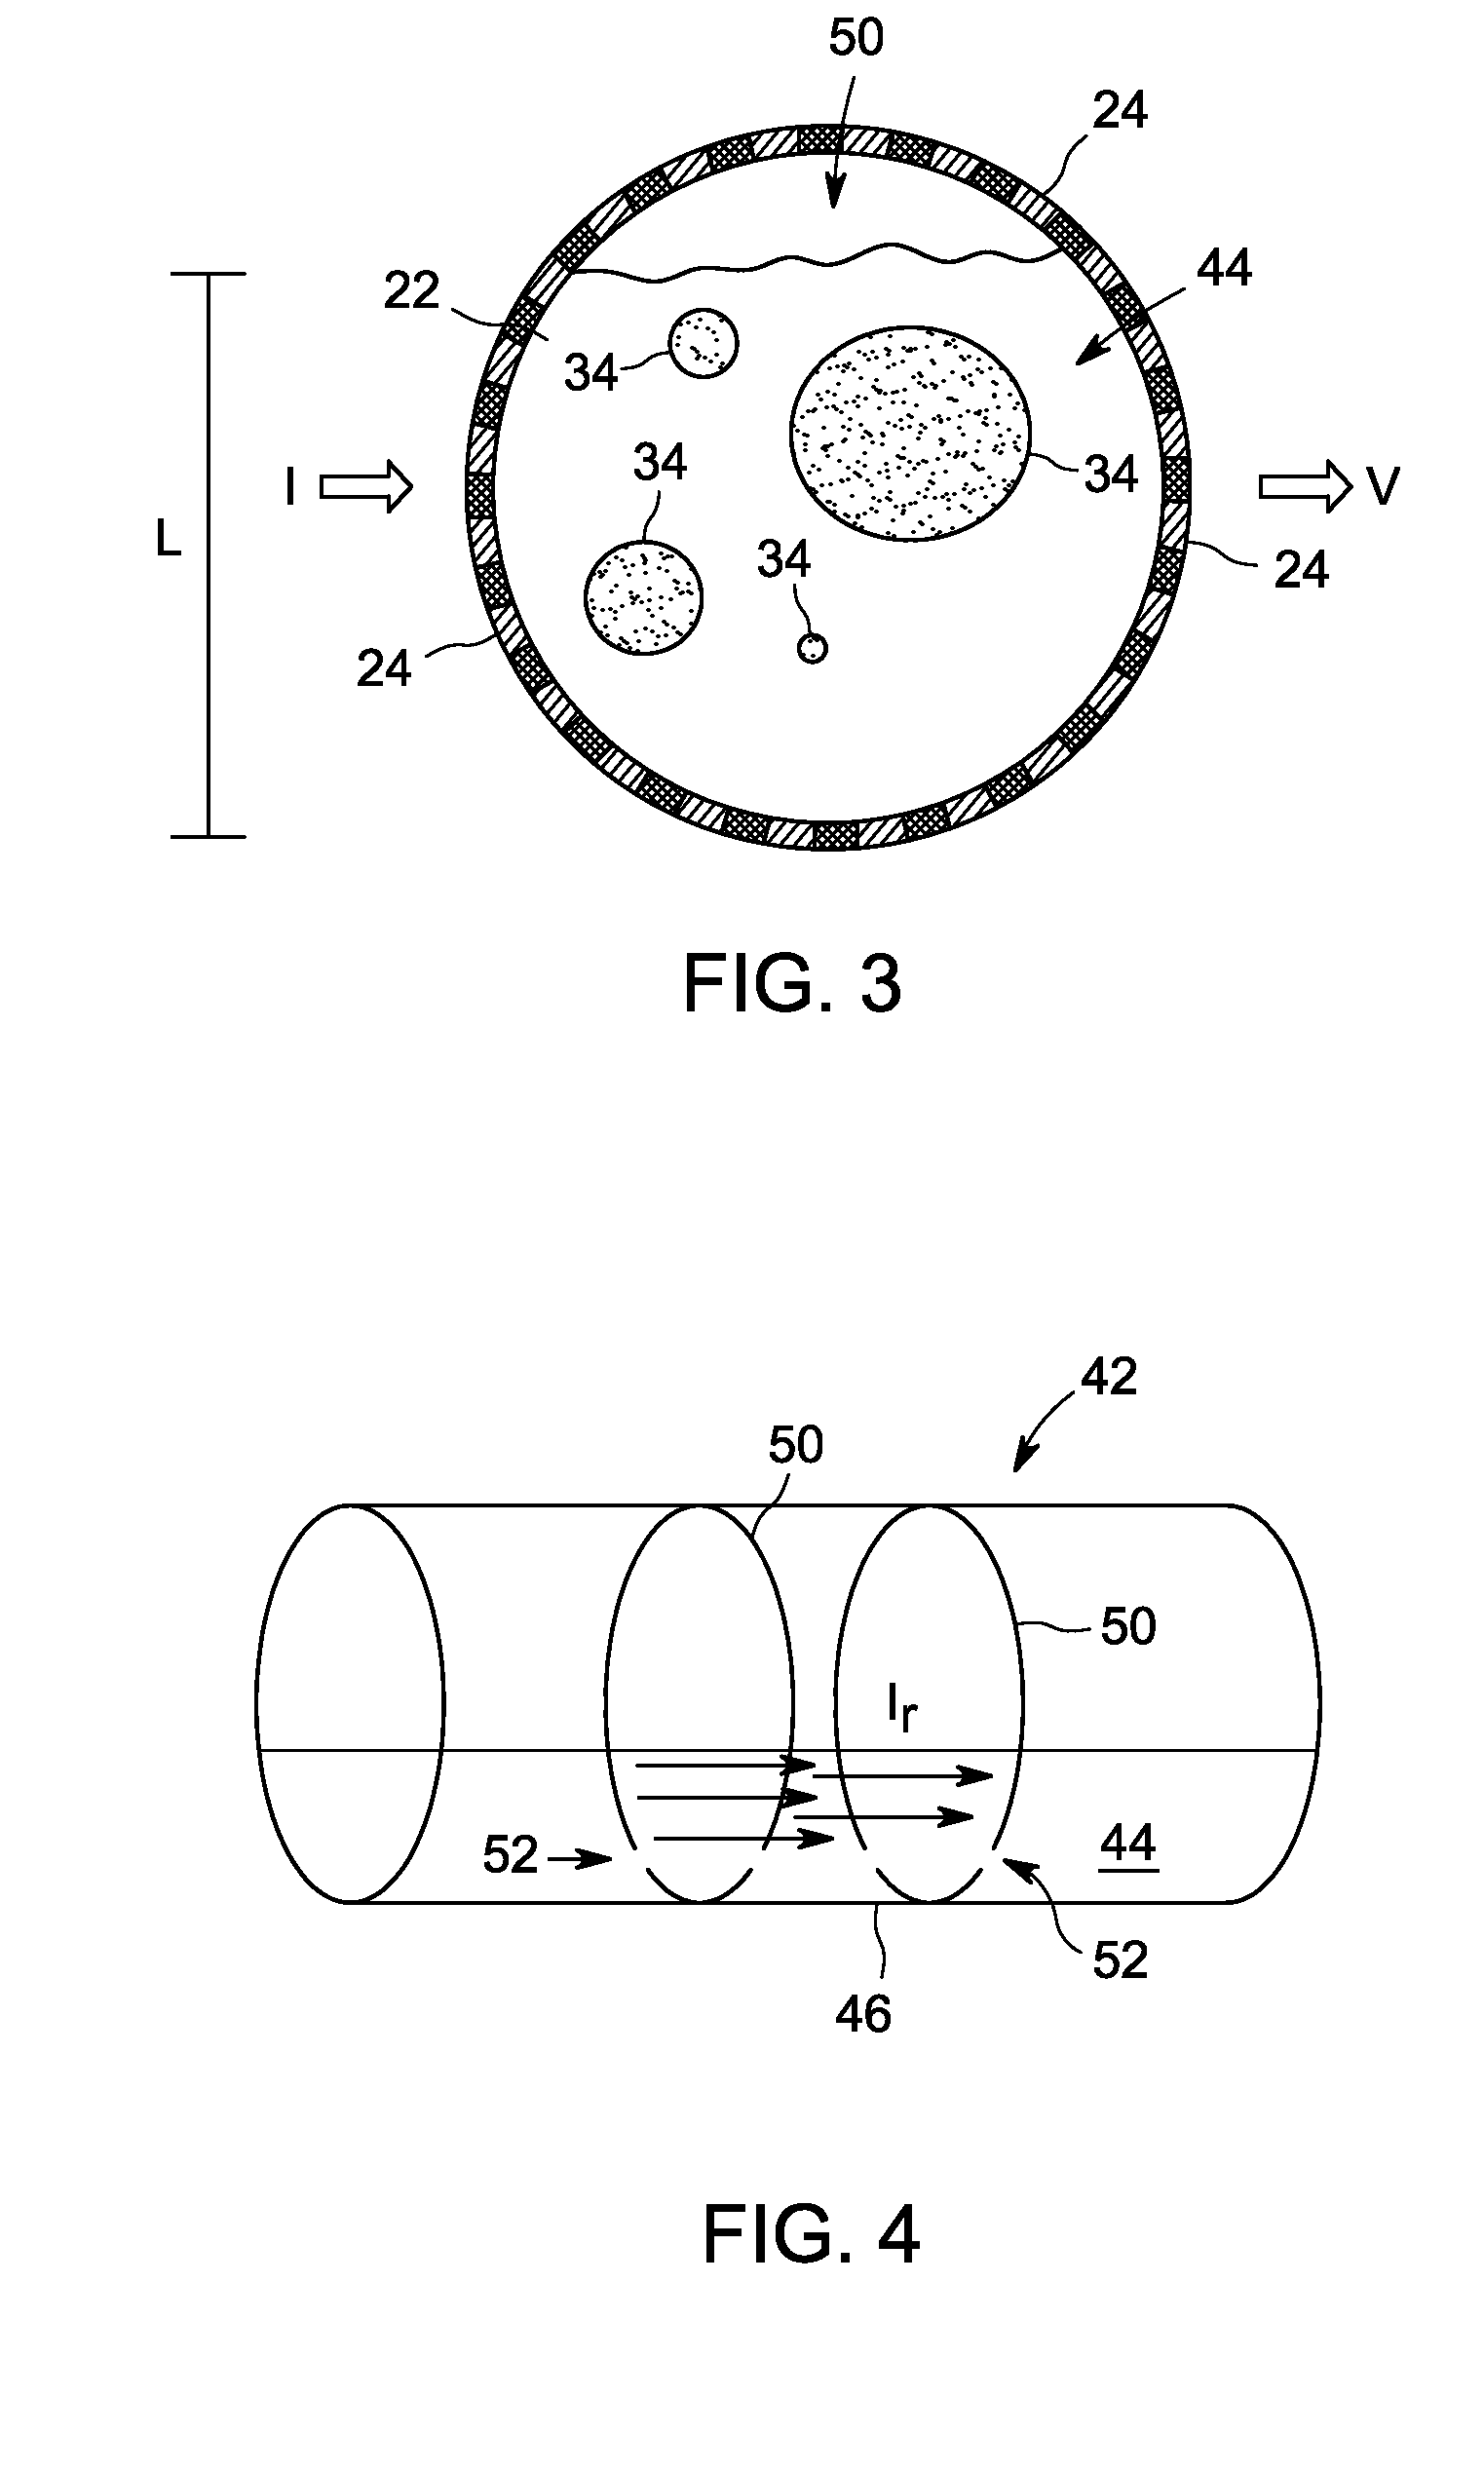 Transducer configurations and methods for transducer positioning in electrical impedance tomography